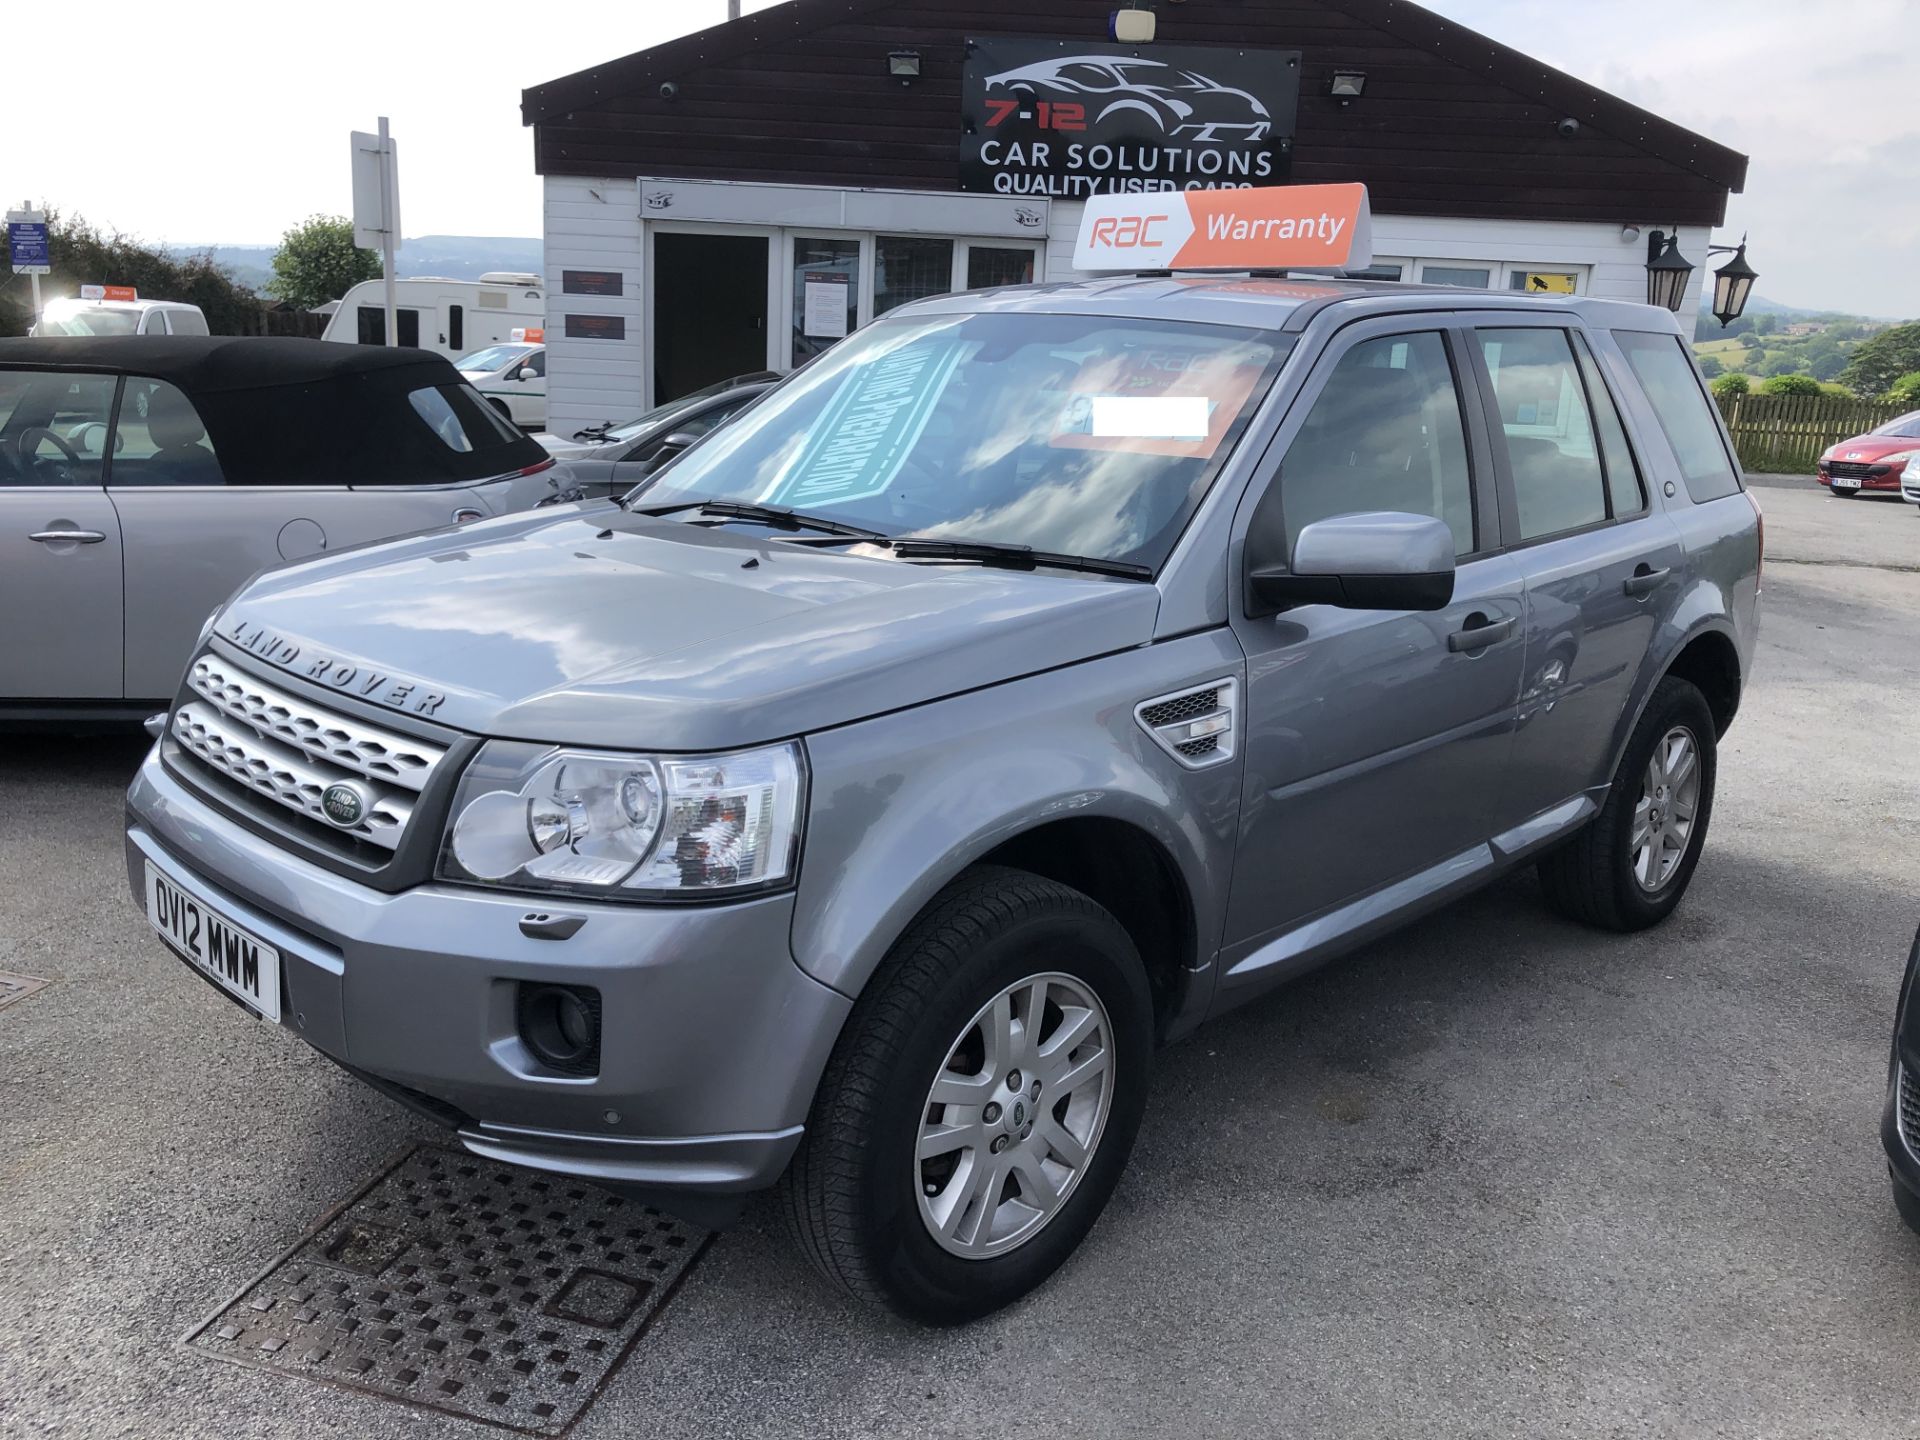 2012/12 REG LAND ROVER FREELANDER XS SD4 AUTO 2.2 DIESEL GREY, SHOWING 2 FORMER KEEPERS *NO VAT* - Image 3 of 21